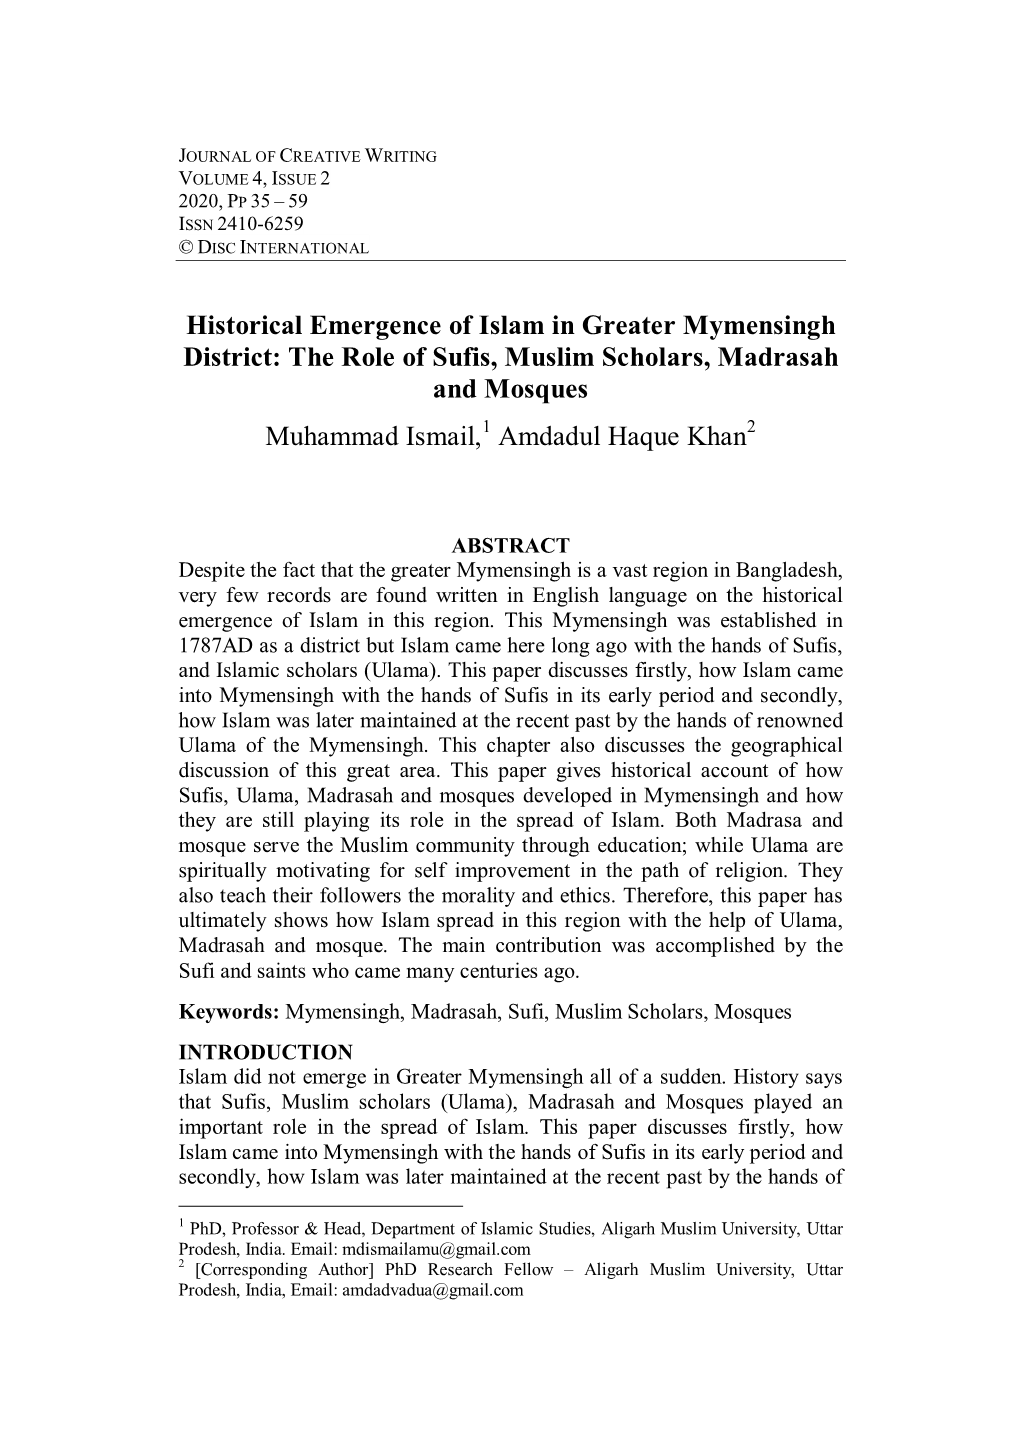 Historical Emergence of Islam in Greater Mymensingh District: the Role of Sufis, Muslim Scholars, Madrasah and Mosques Muhammad Ismail,1 Amdadul Haque Khan2